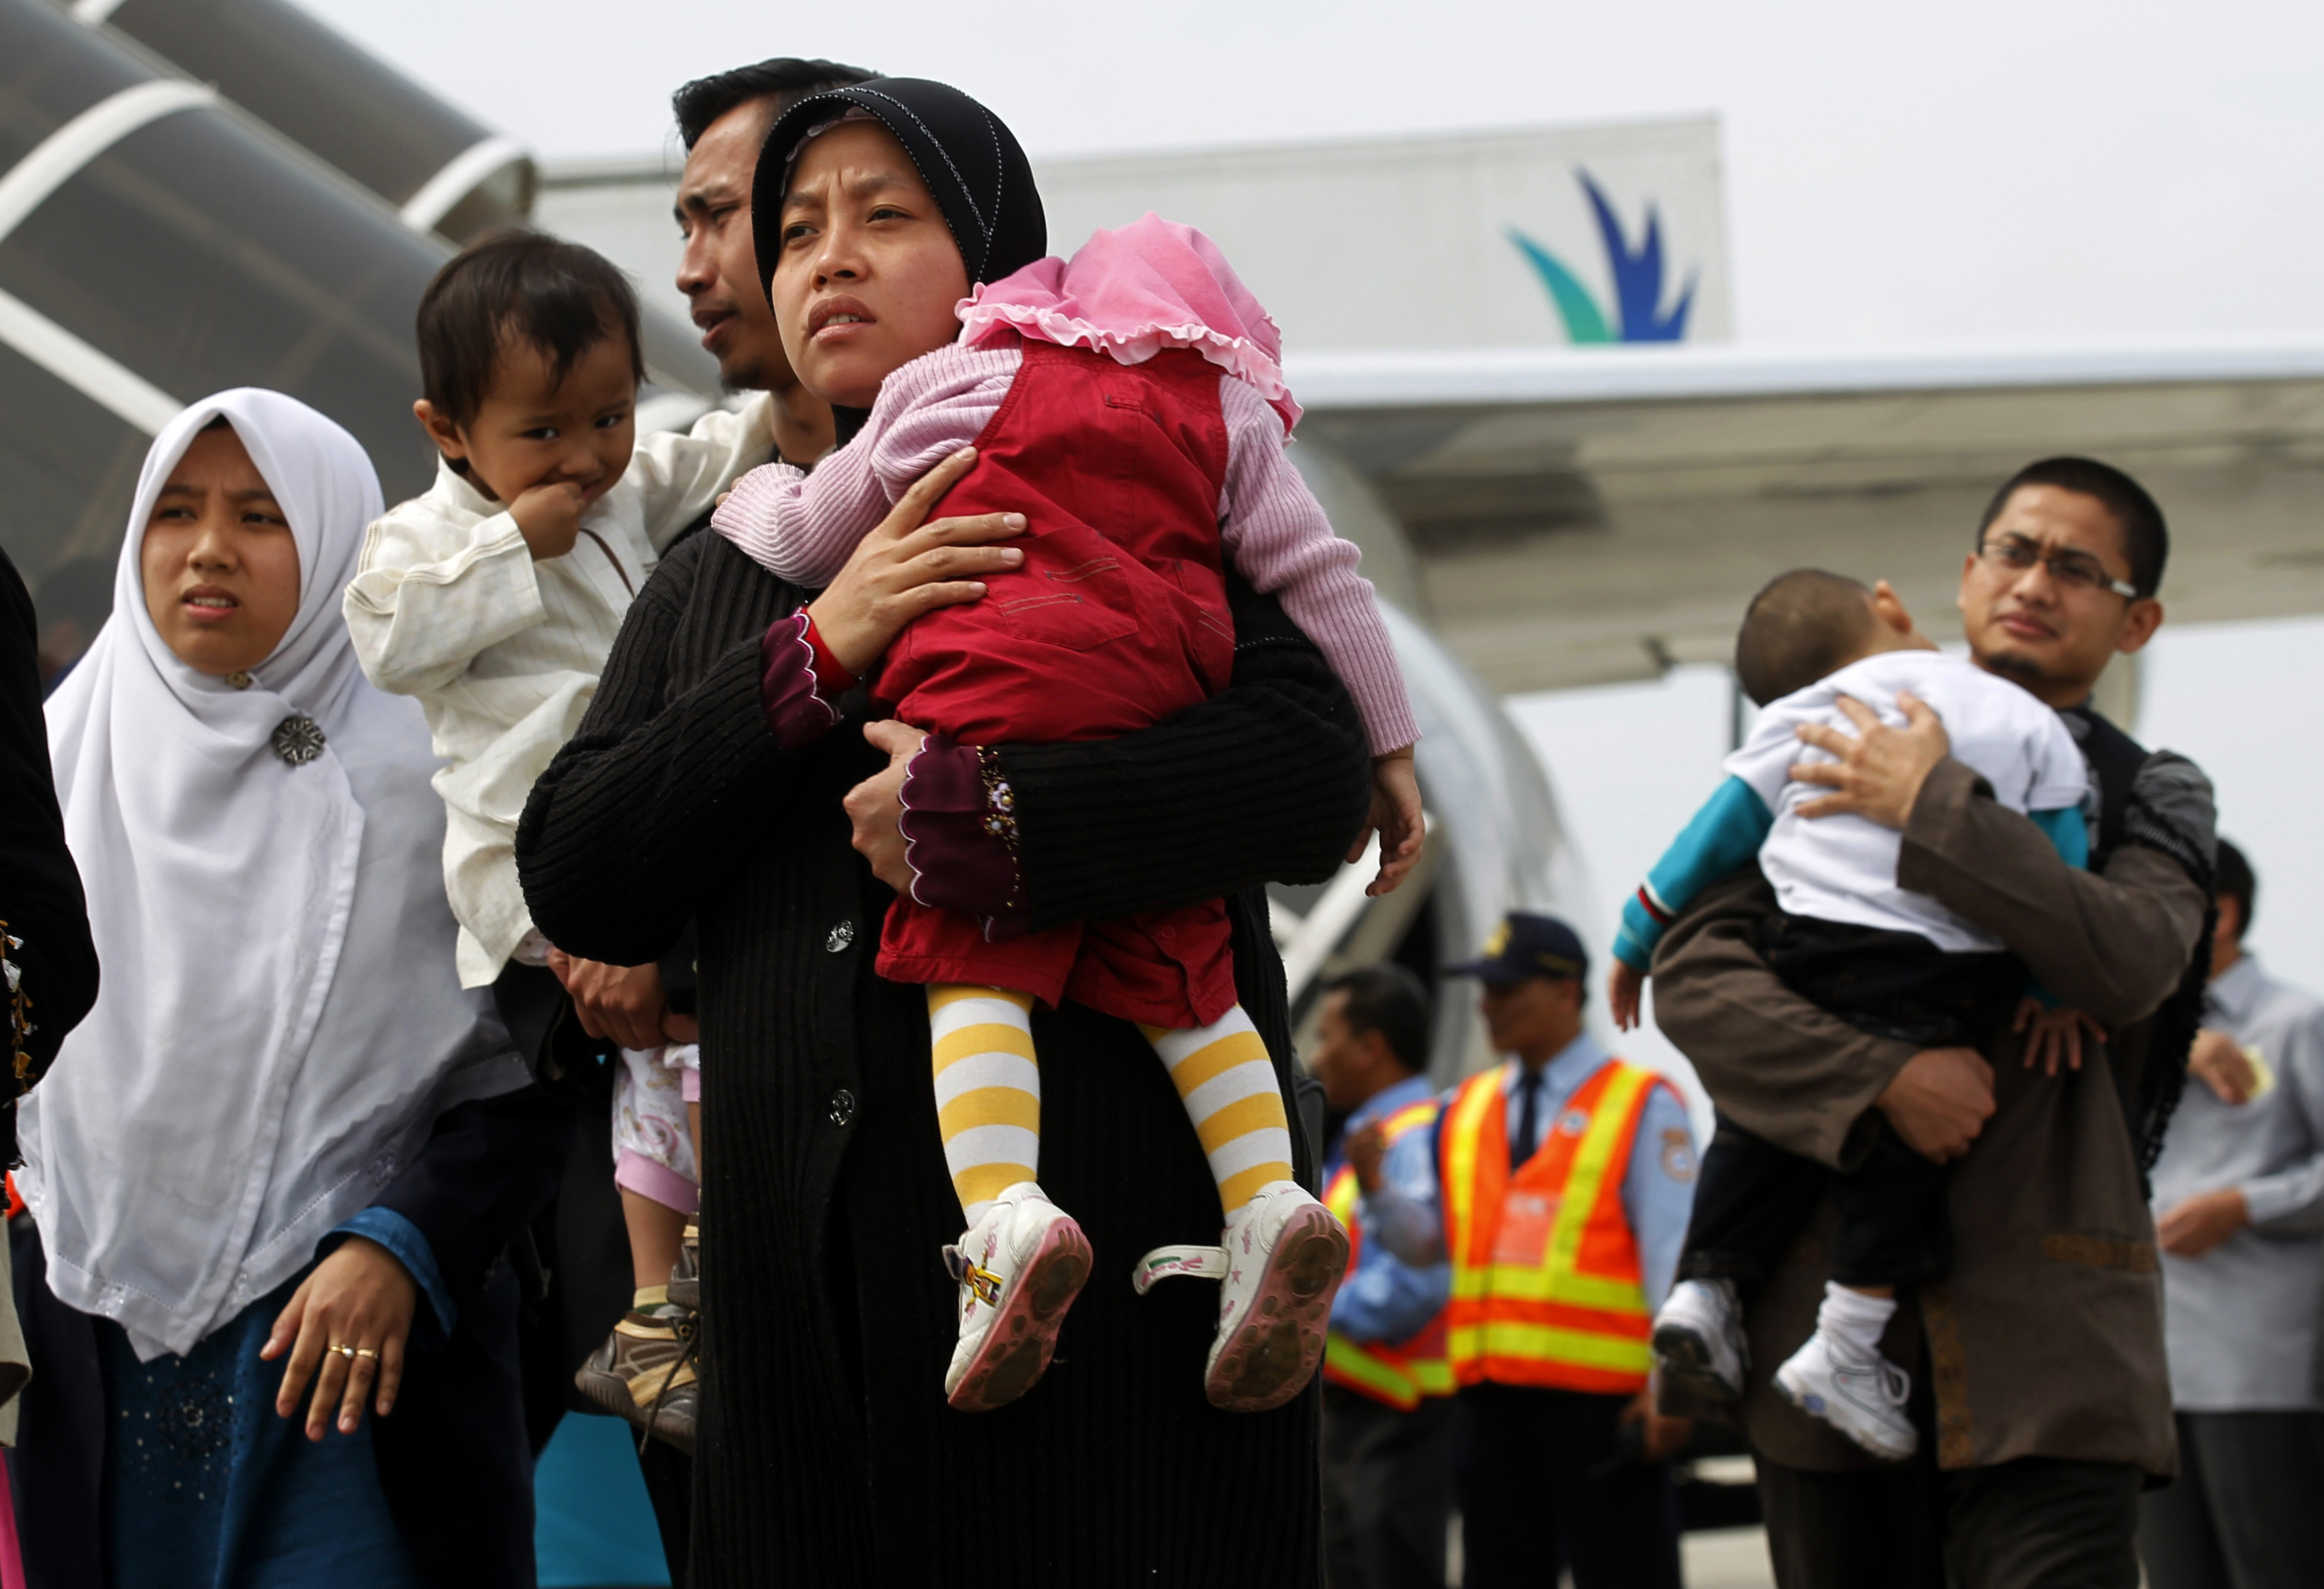  A group of Indonesian migrant workers and their families at an airport, protected by government regulations and standards.